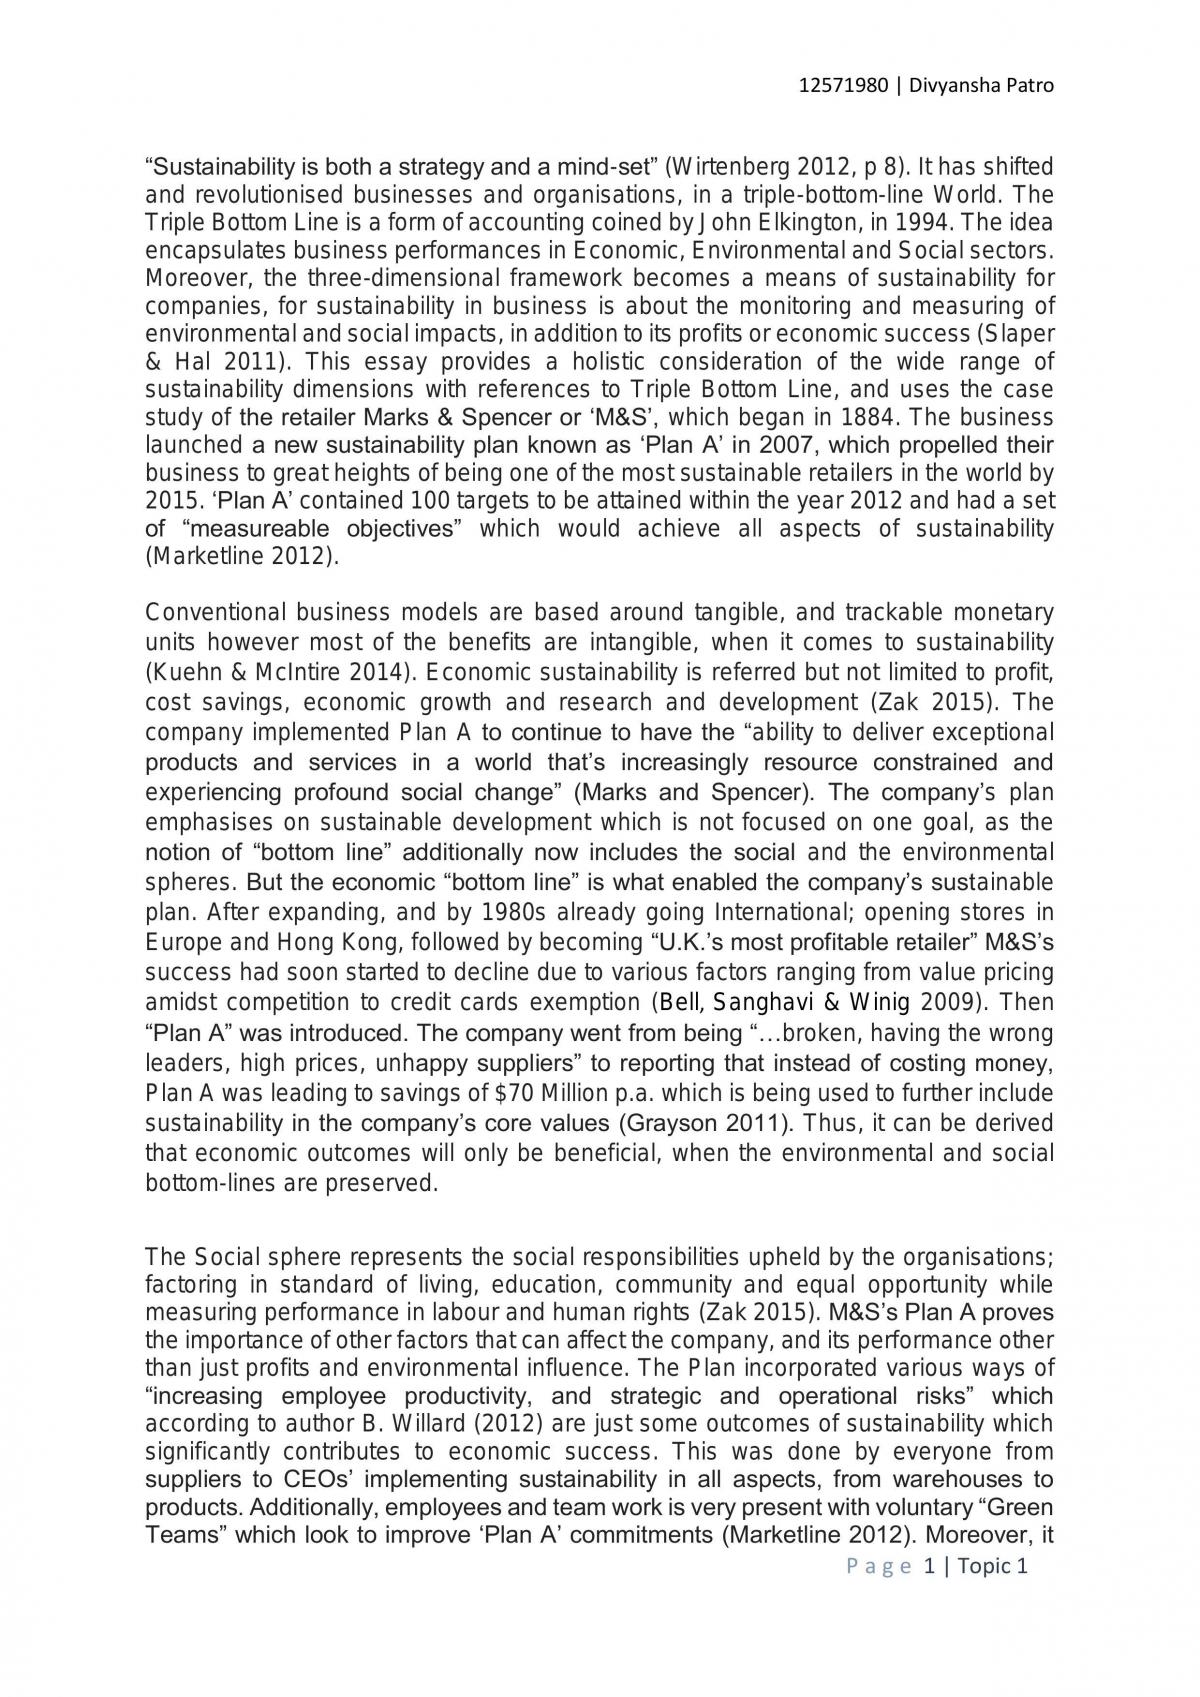 Sustainability in Business Essay - Page 1